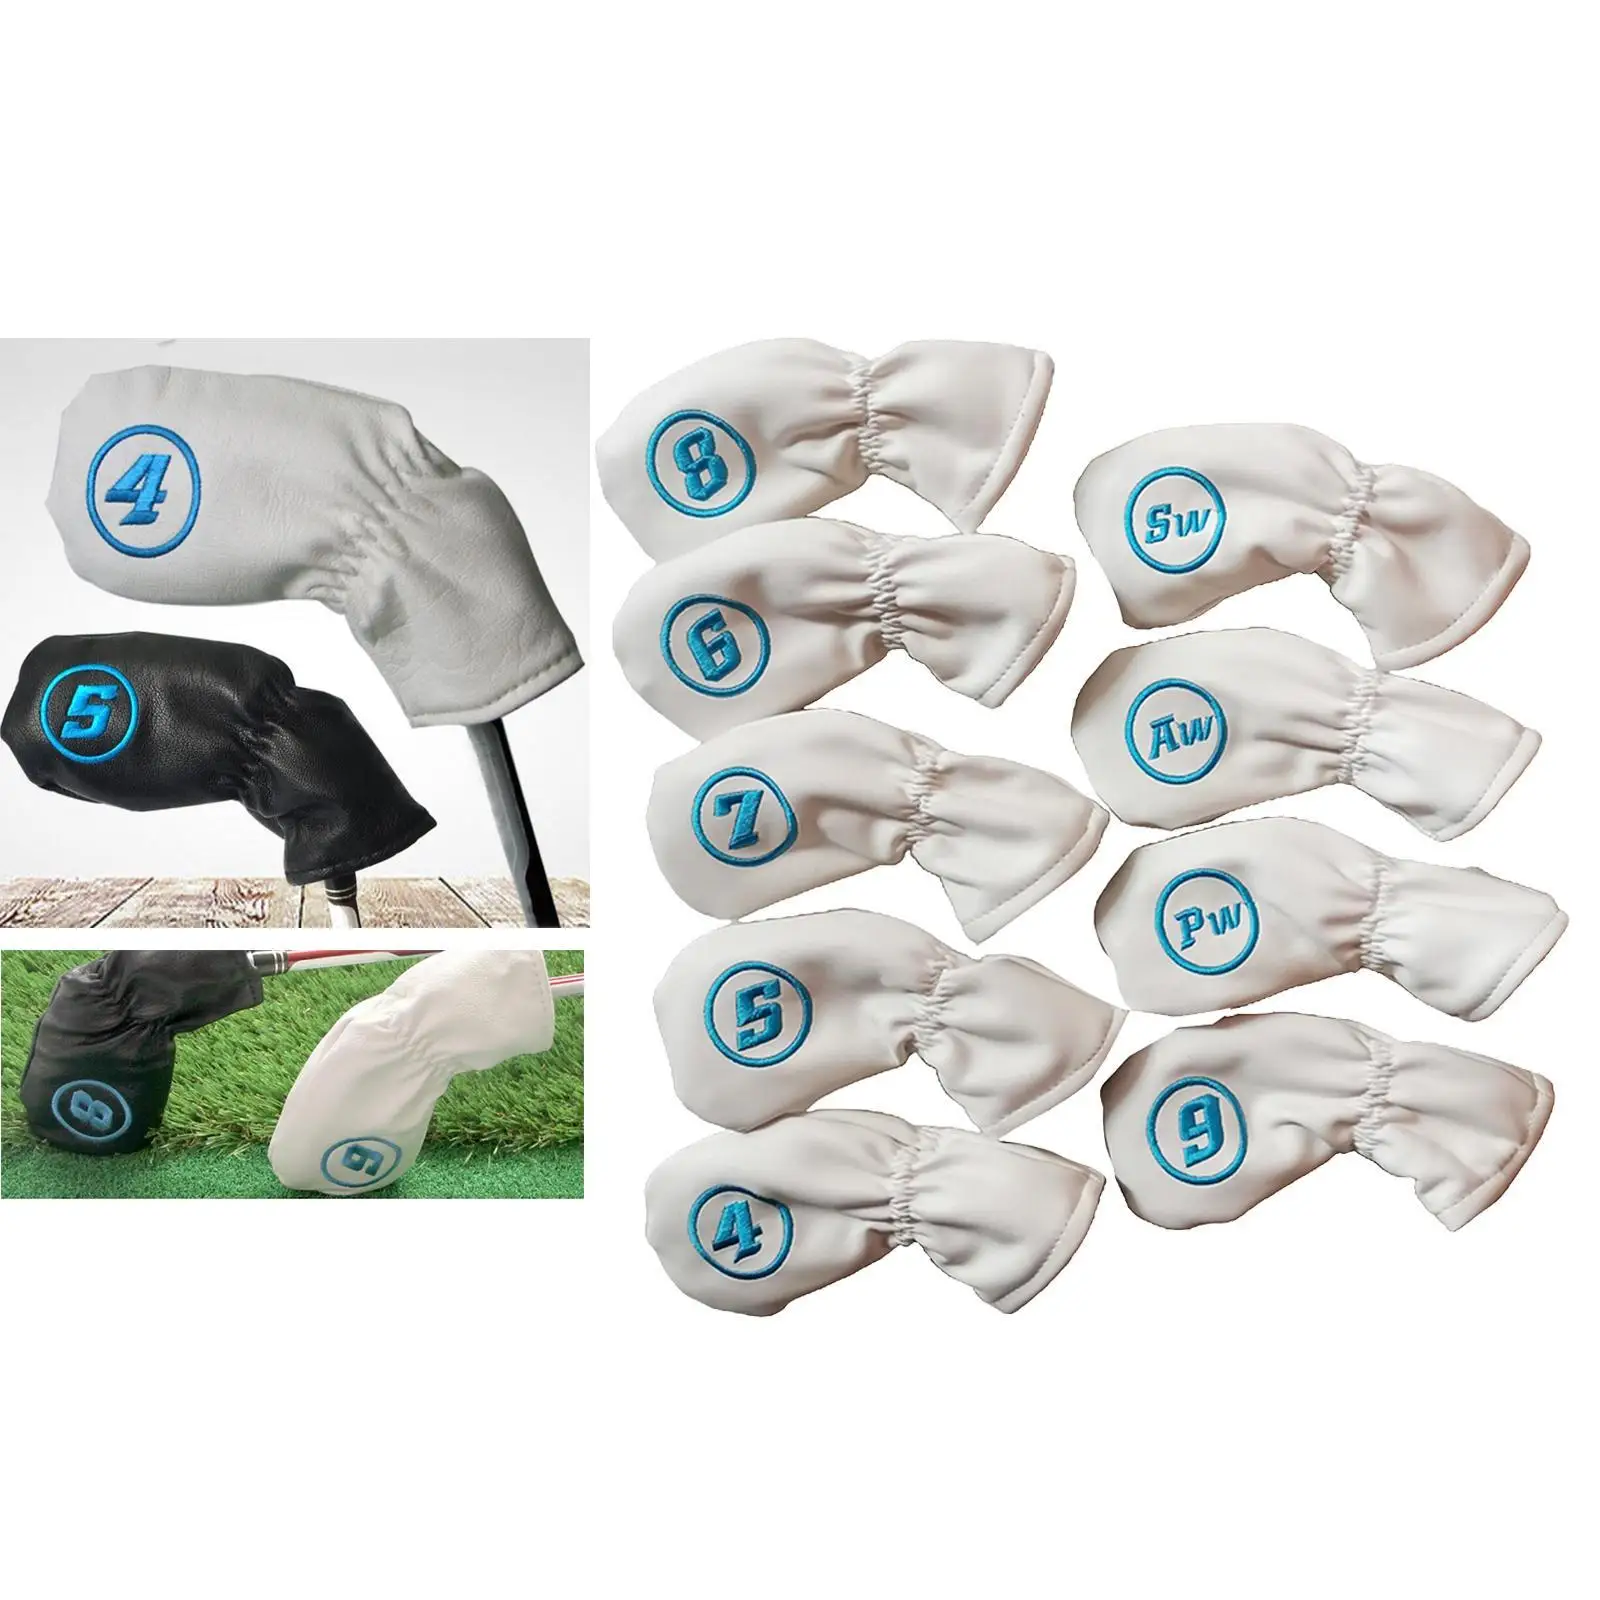 9 Pcs/Set Golf Headcovers For Iron Set Clubs Blue Red White Black Color Waterproof PU Golf Iron Cover Heads Protector